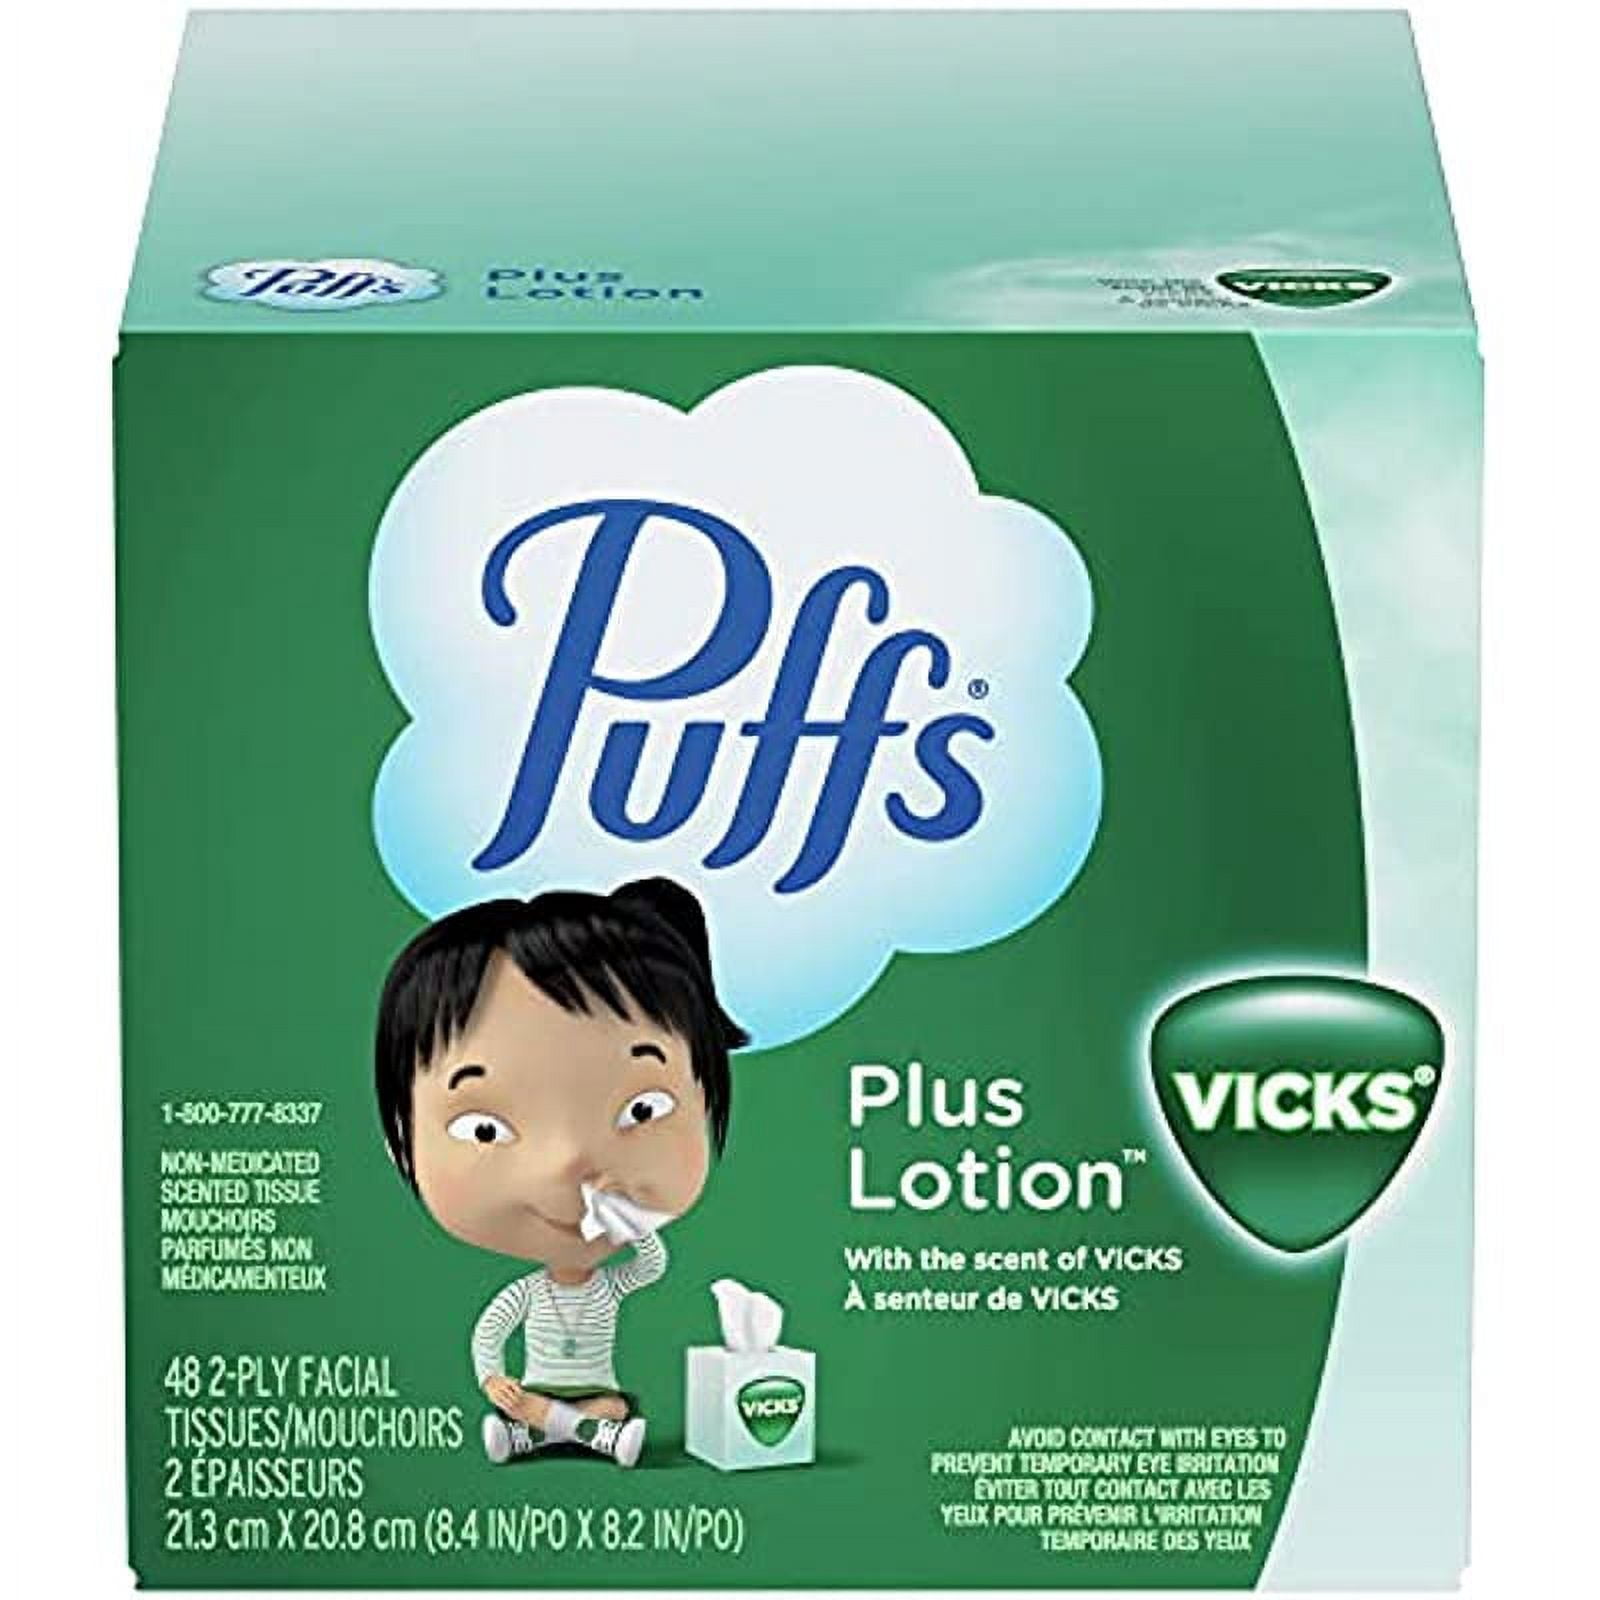 Puffs Plus Lotion with the Scent of Vicks Facial Tissues, 48 Ea, 24